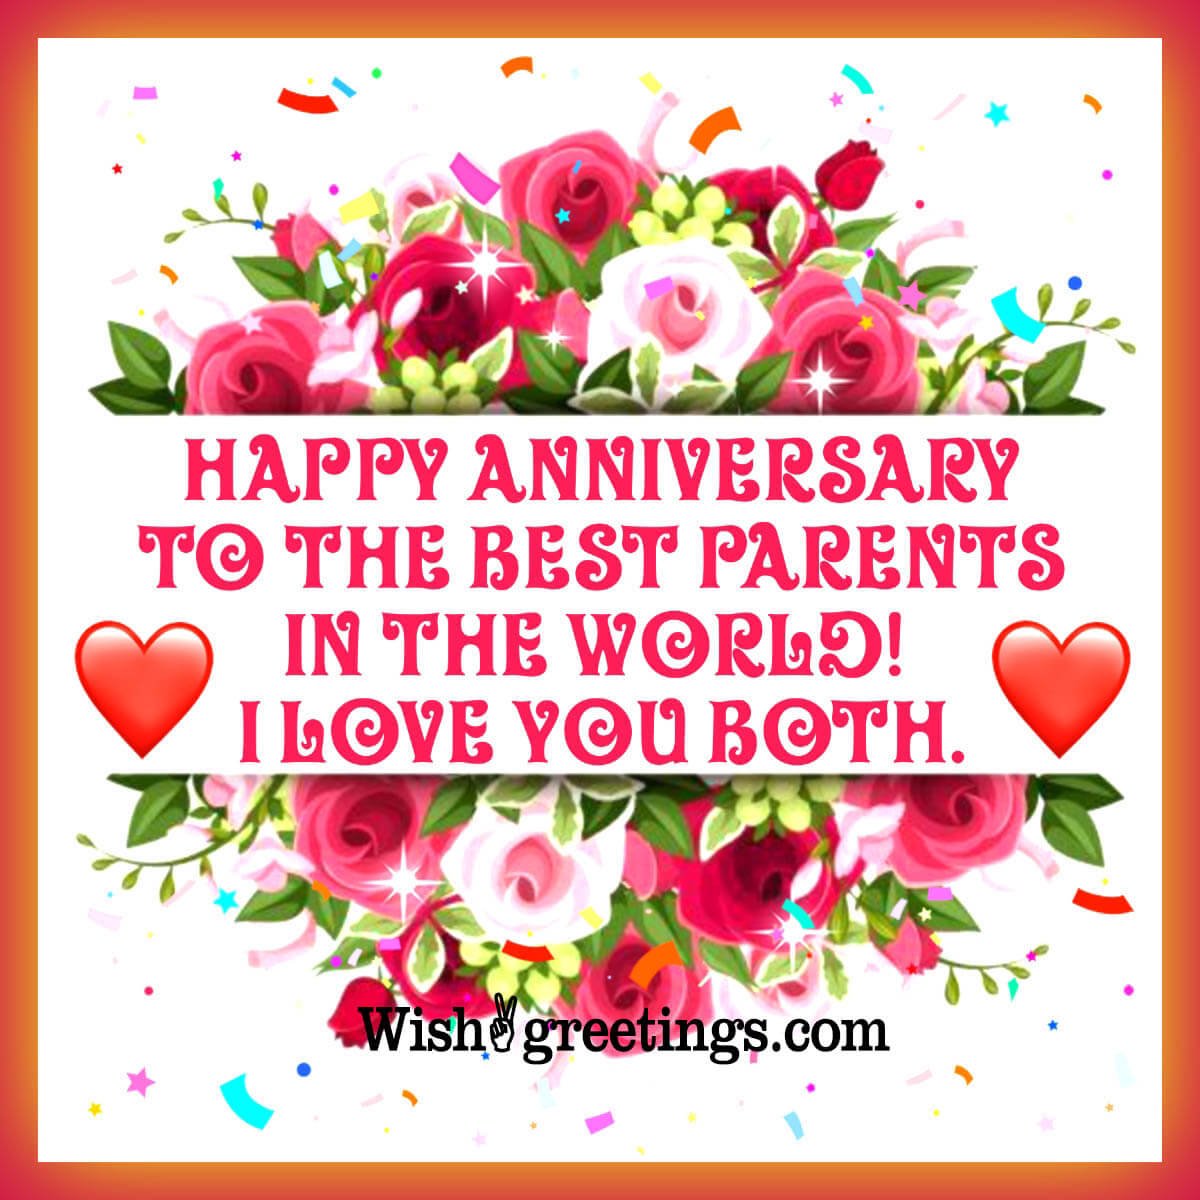 Happy Anniversary Images For Parents